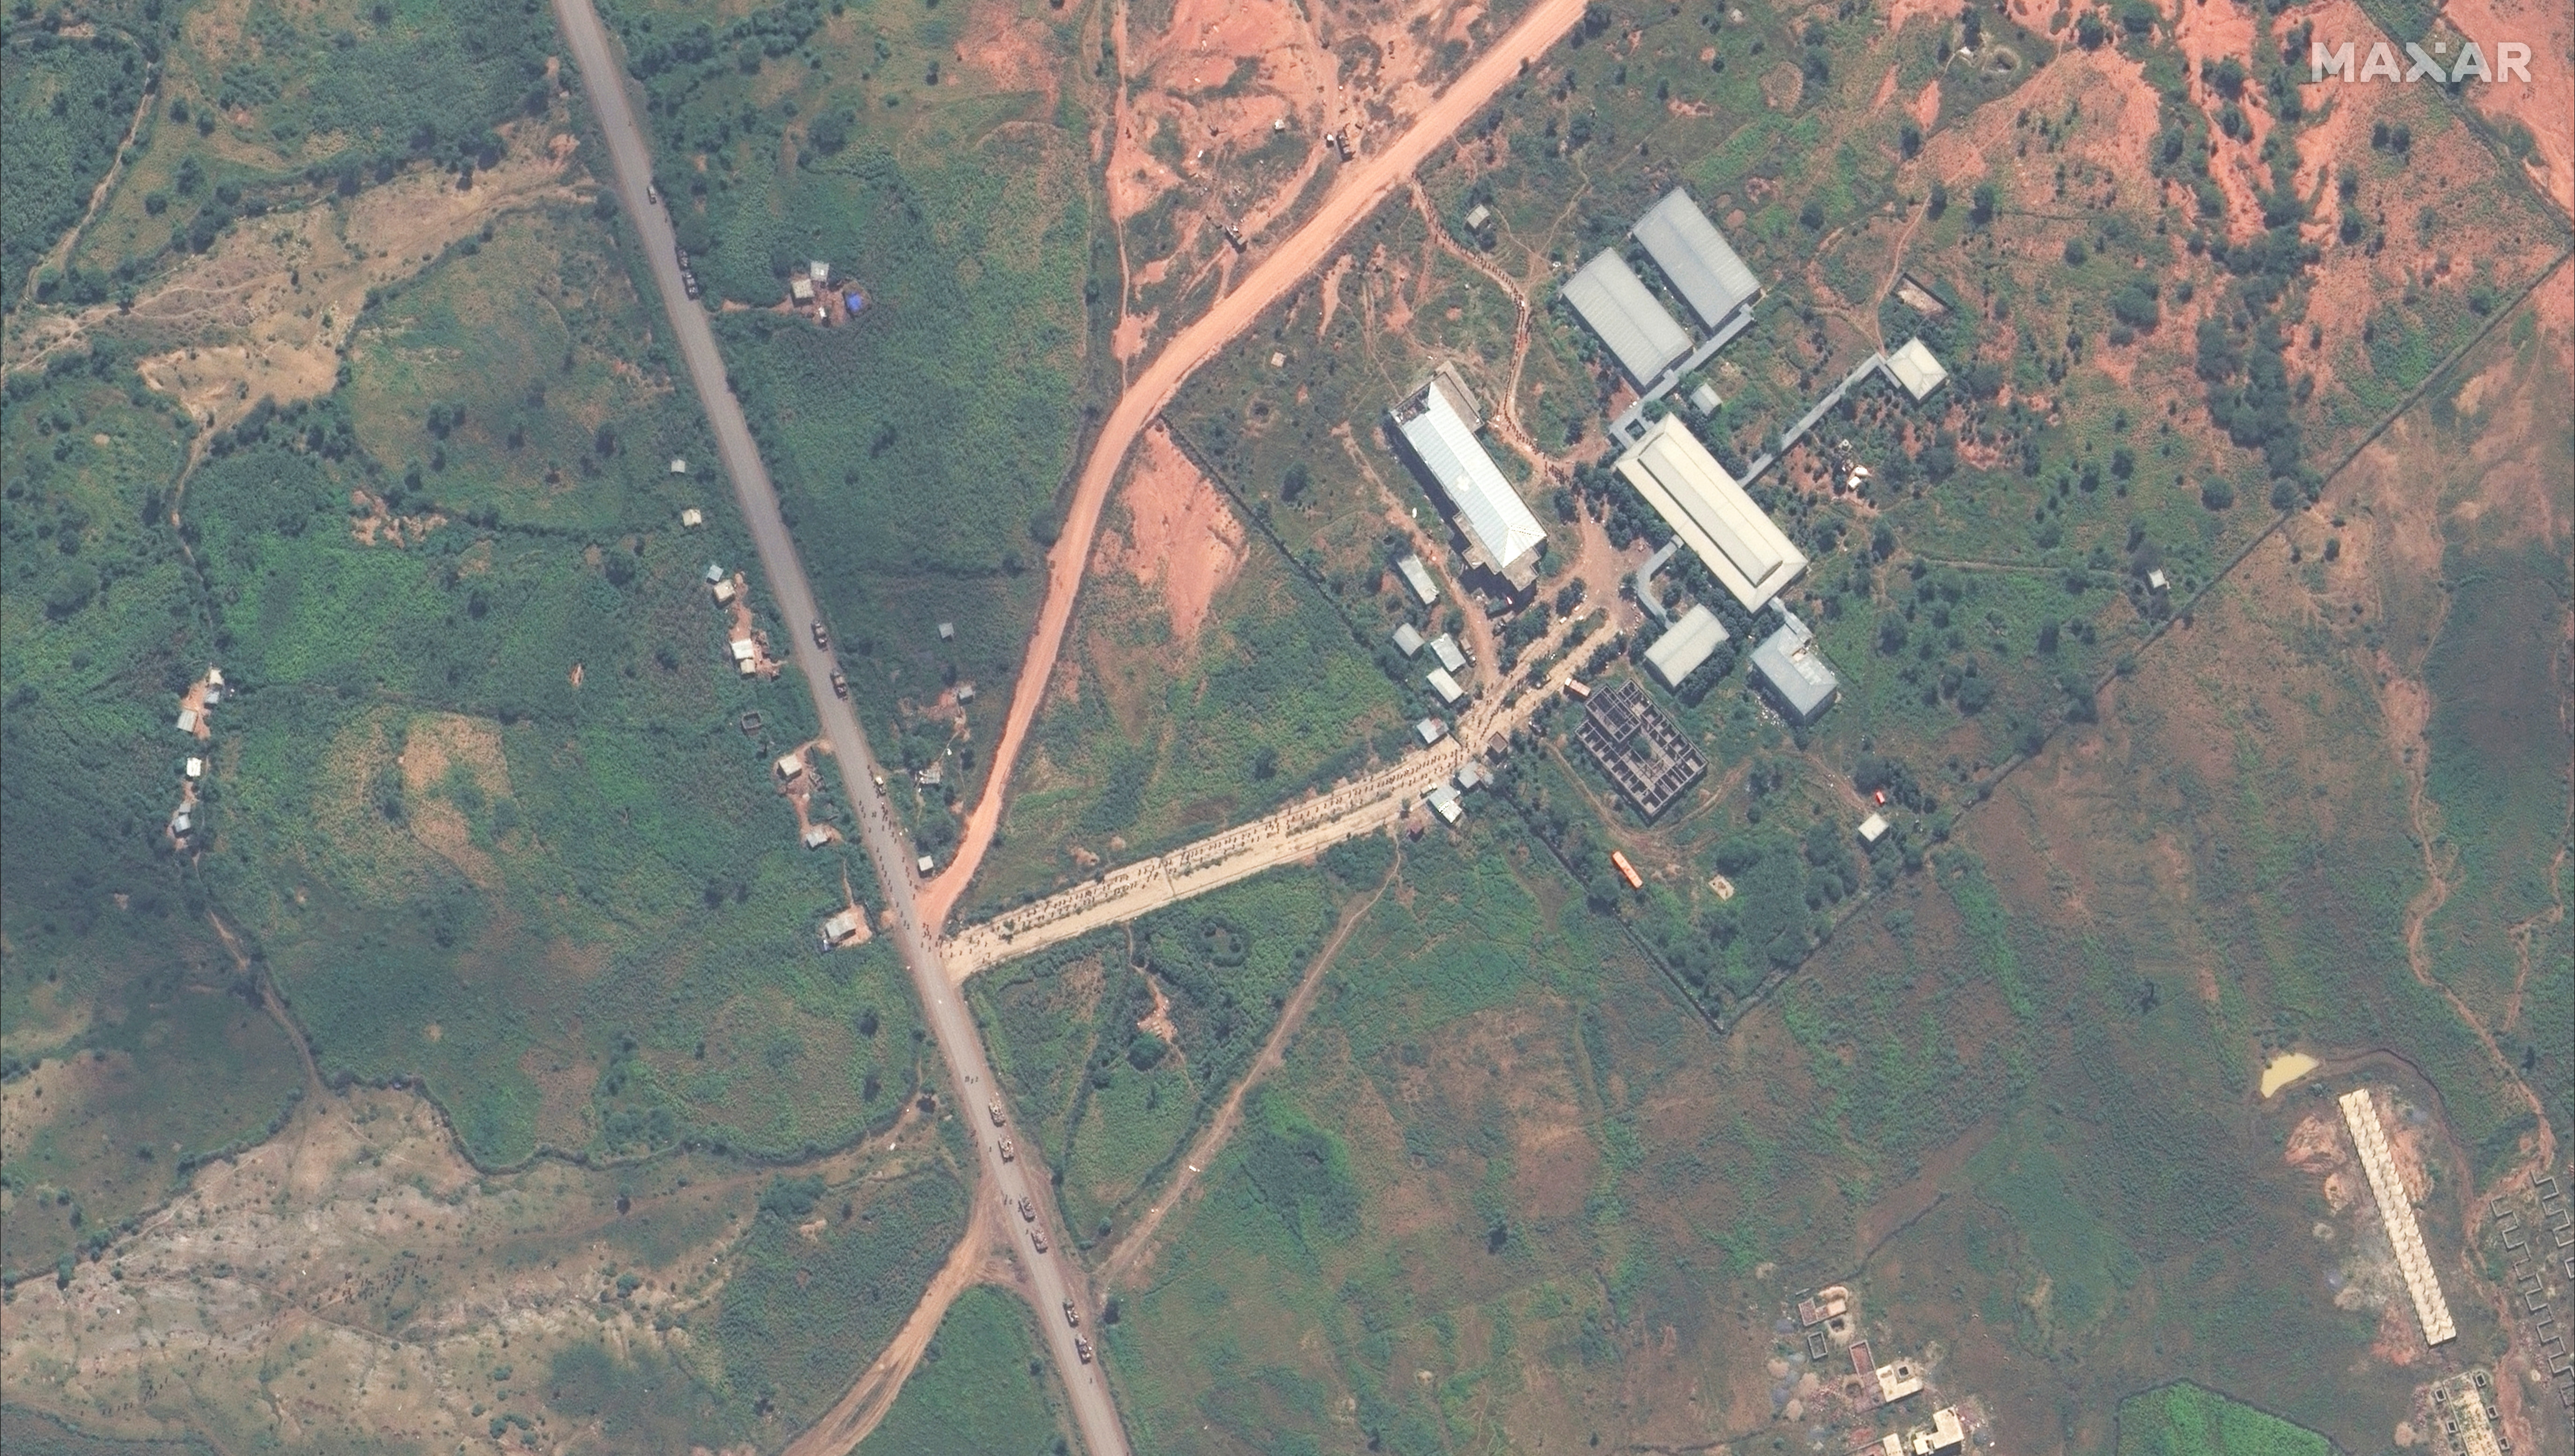 A satellite image shows the mobilization of military forces in the town of Shiraro